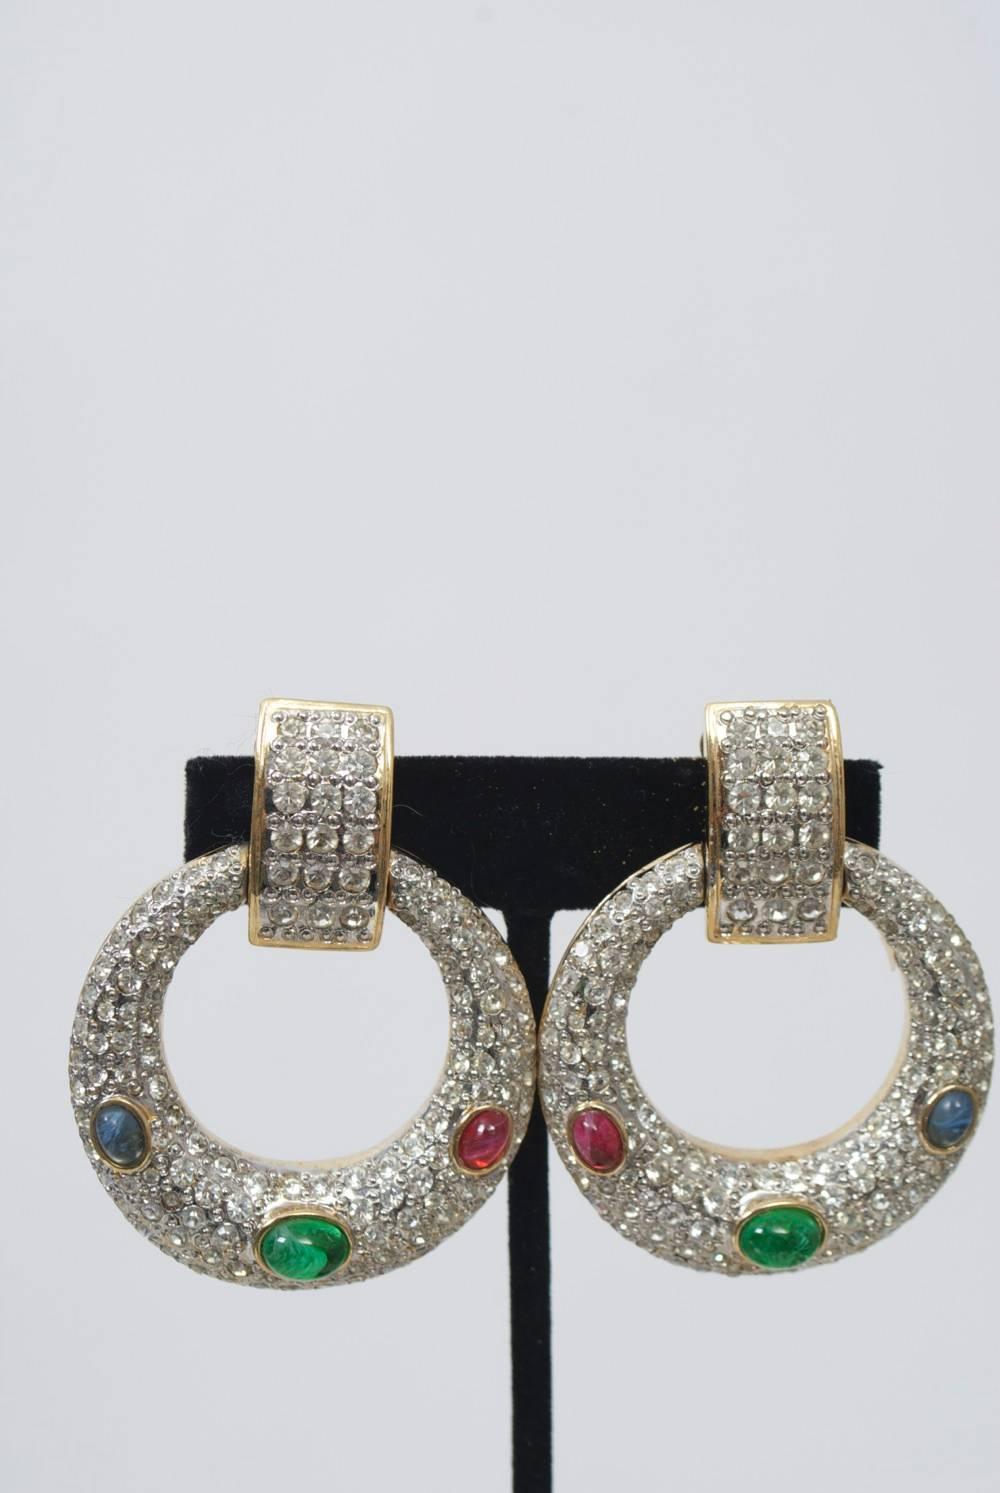 Rhinestone-studded gold metal hoop earrings punctuated by three oval cabochons - green in center, red on one side and blue on the other. By Vogue Bijoux. Great for holiday.